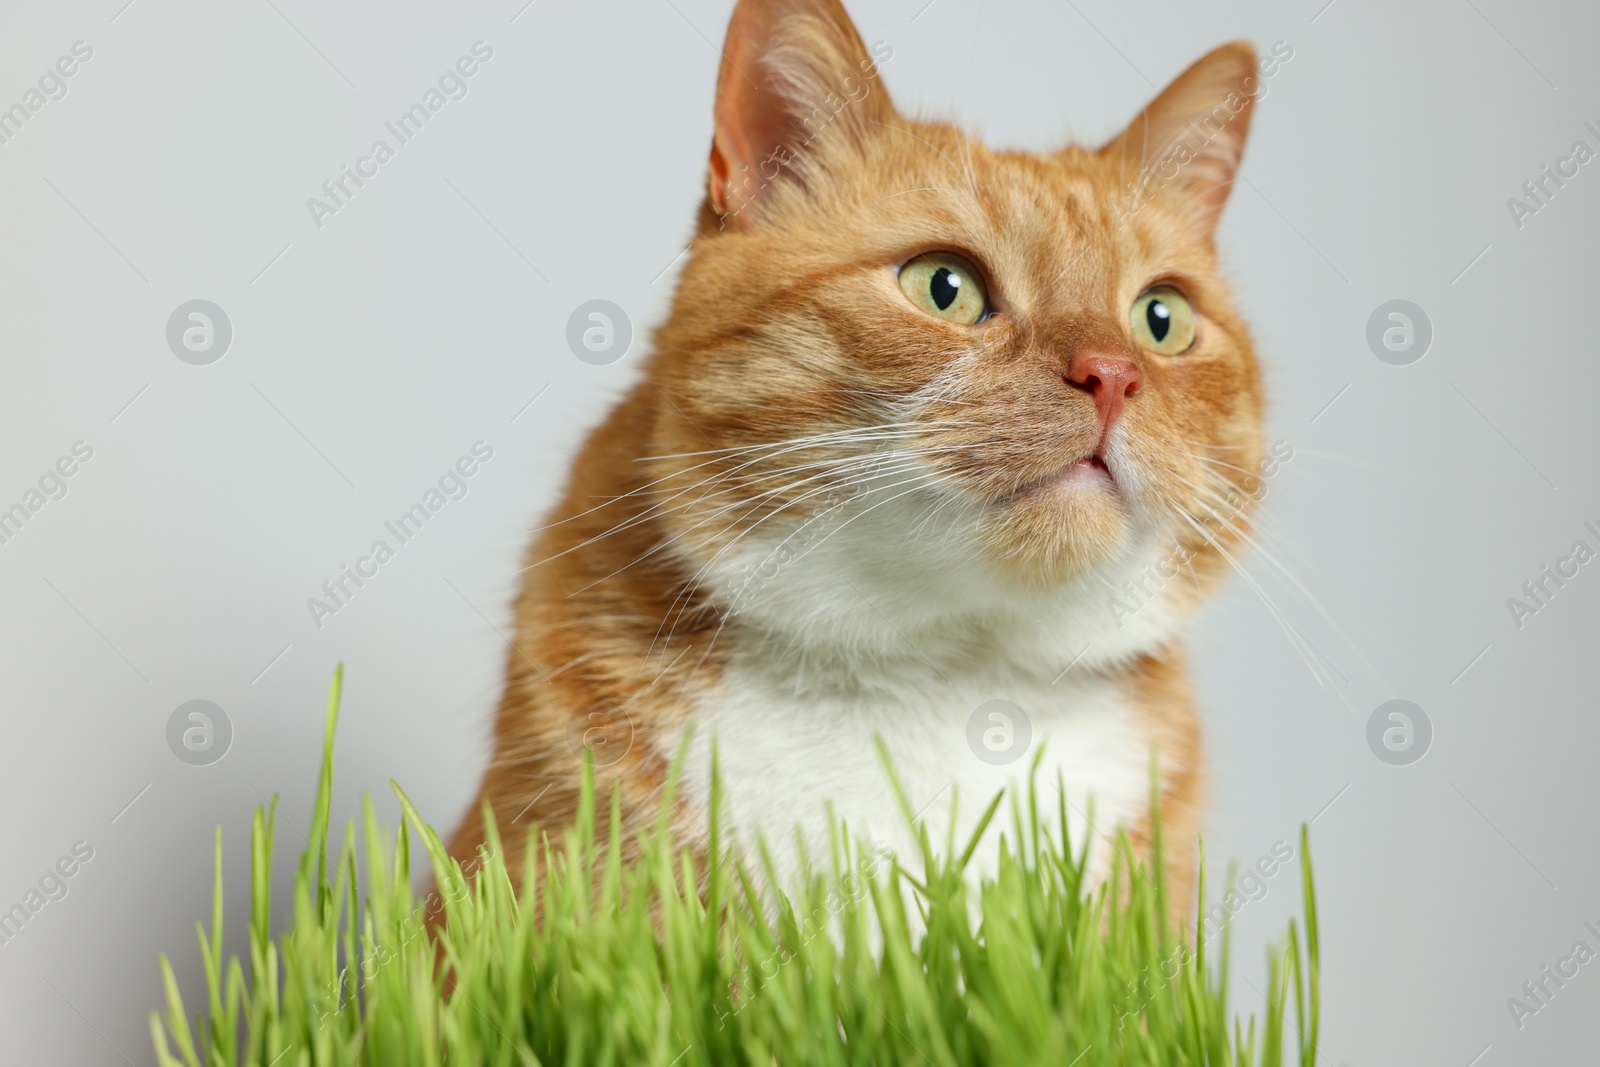 Photo of Cute ginger cat and green grass near light grey wall